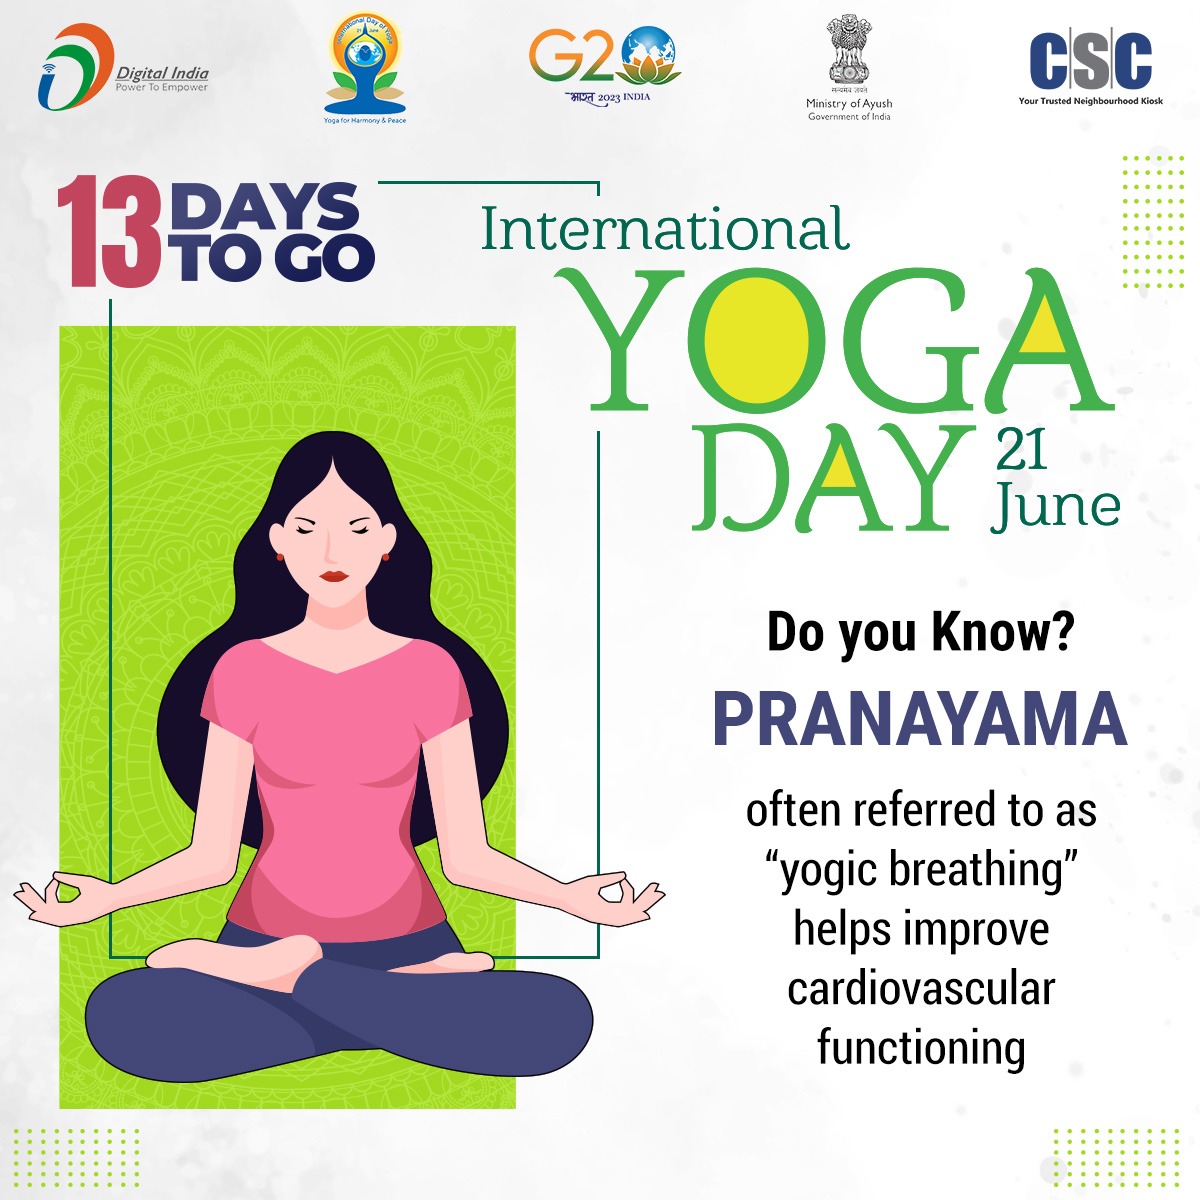 Just 1️⃣3 Days to go for the big celebration of #InternationalDayofYoga2023!

“#Yoga is an art and science of living”

Let's start practicing yoga now for a healthier and more active way of life.

#IDY2023 #CSC #MyYogaMyPose
#CSCPeYoga #DigitalIndia #CSCHealth #YogaDay